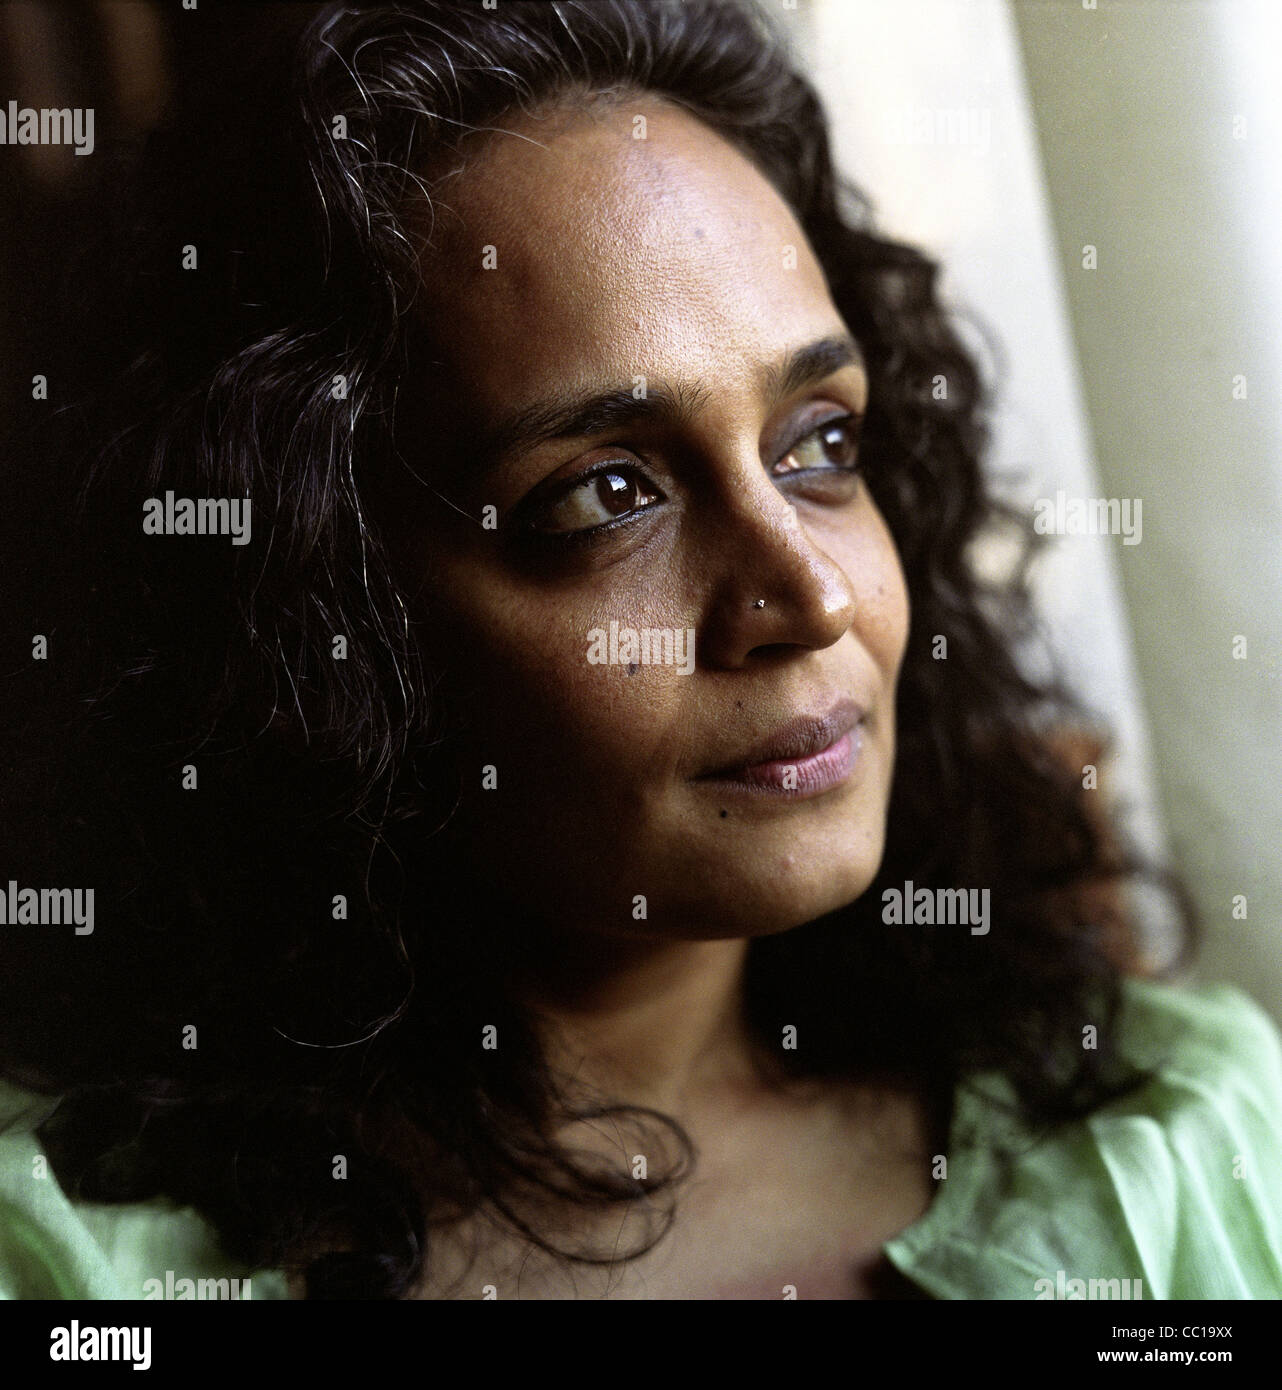 Arundhati Roy, Booker Prize winning author of 'The God of Small Things' at her home in New Delhi, India. Stock Photo